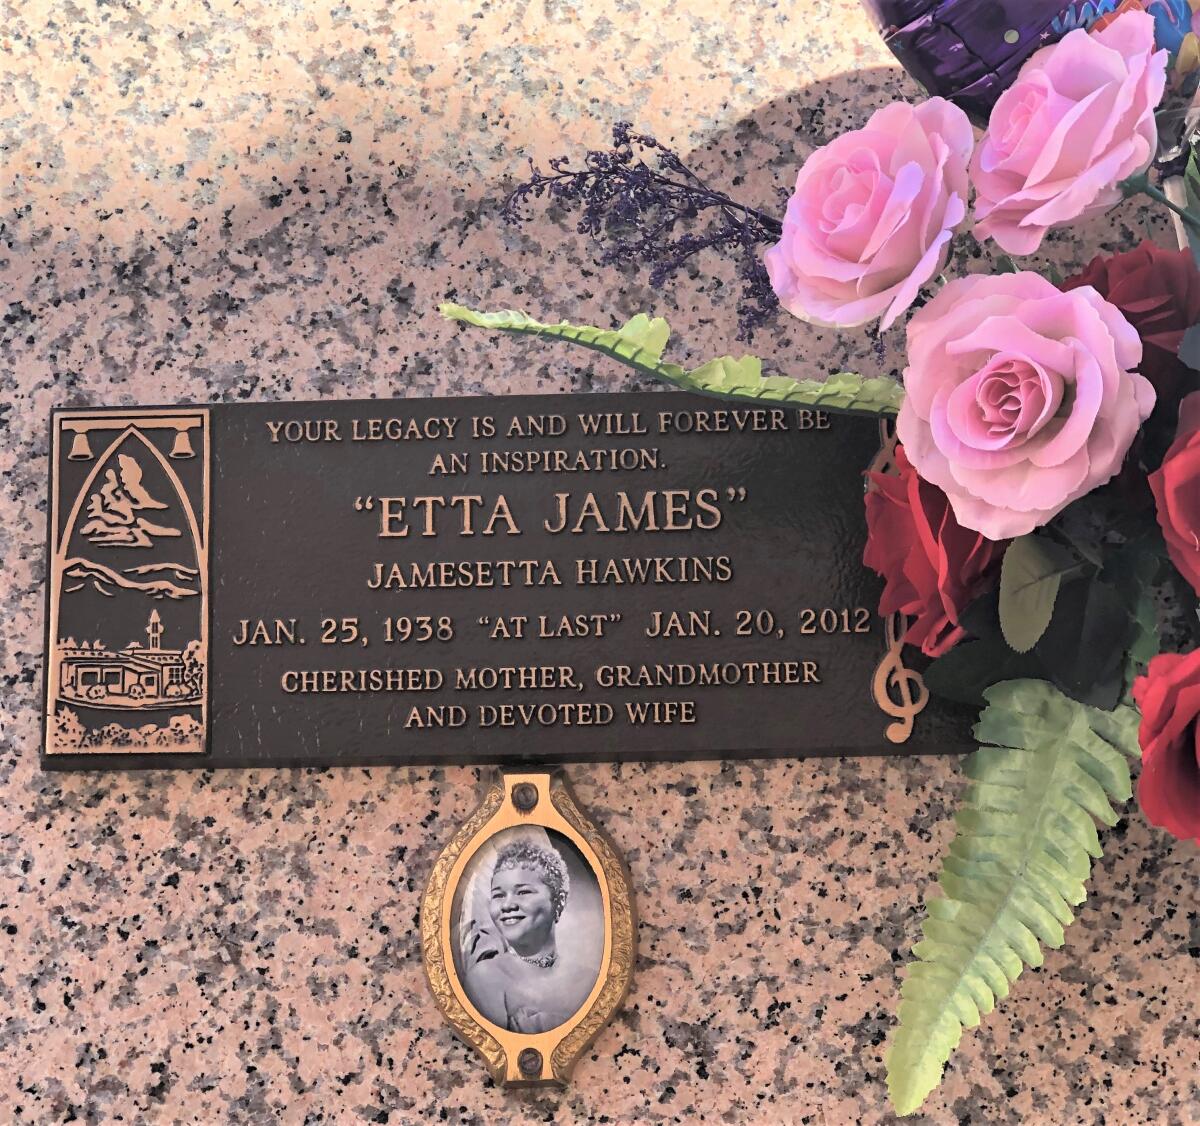 Etta James' marker at Inglewood Park Cemetery, final resting place to a number of famous singers and actors.